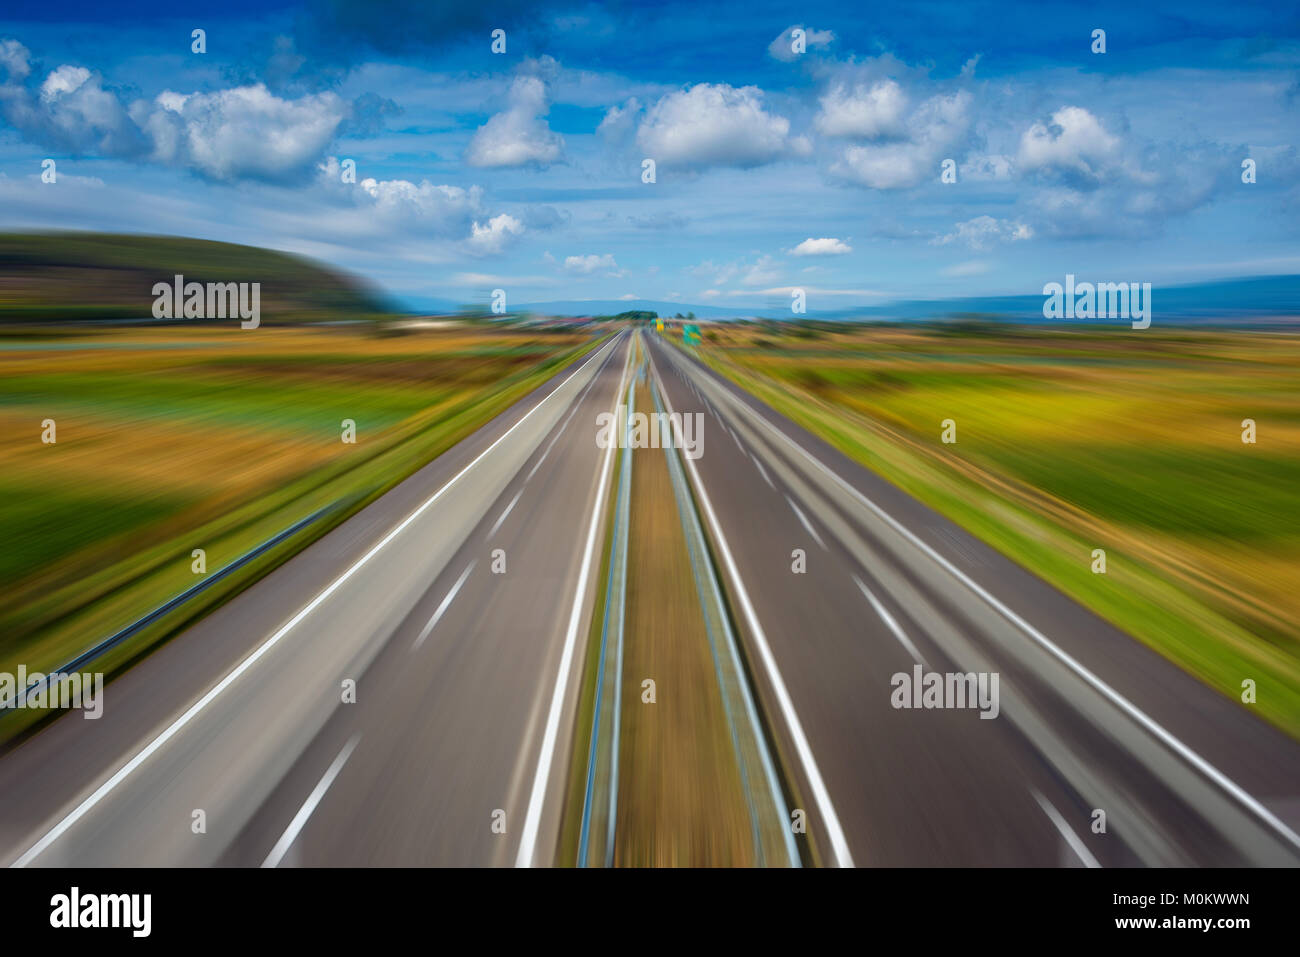 Zoom effect on empty modern highway going through fields Stock Photo